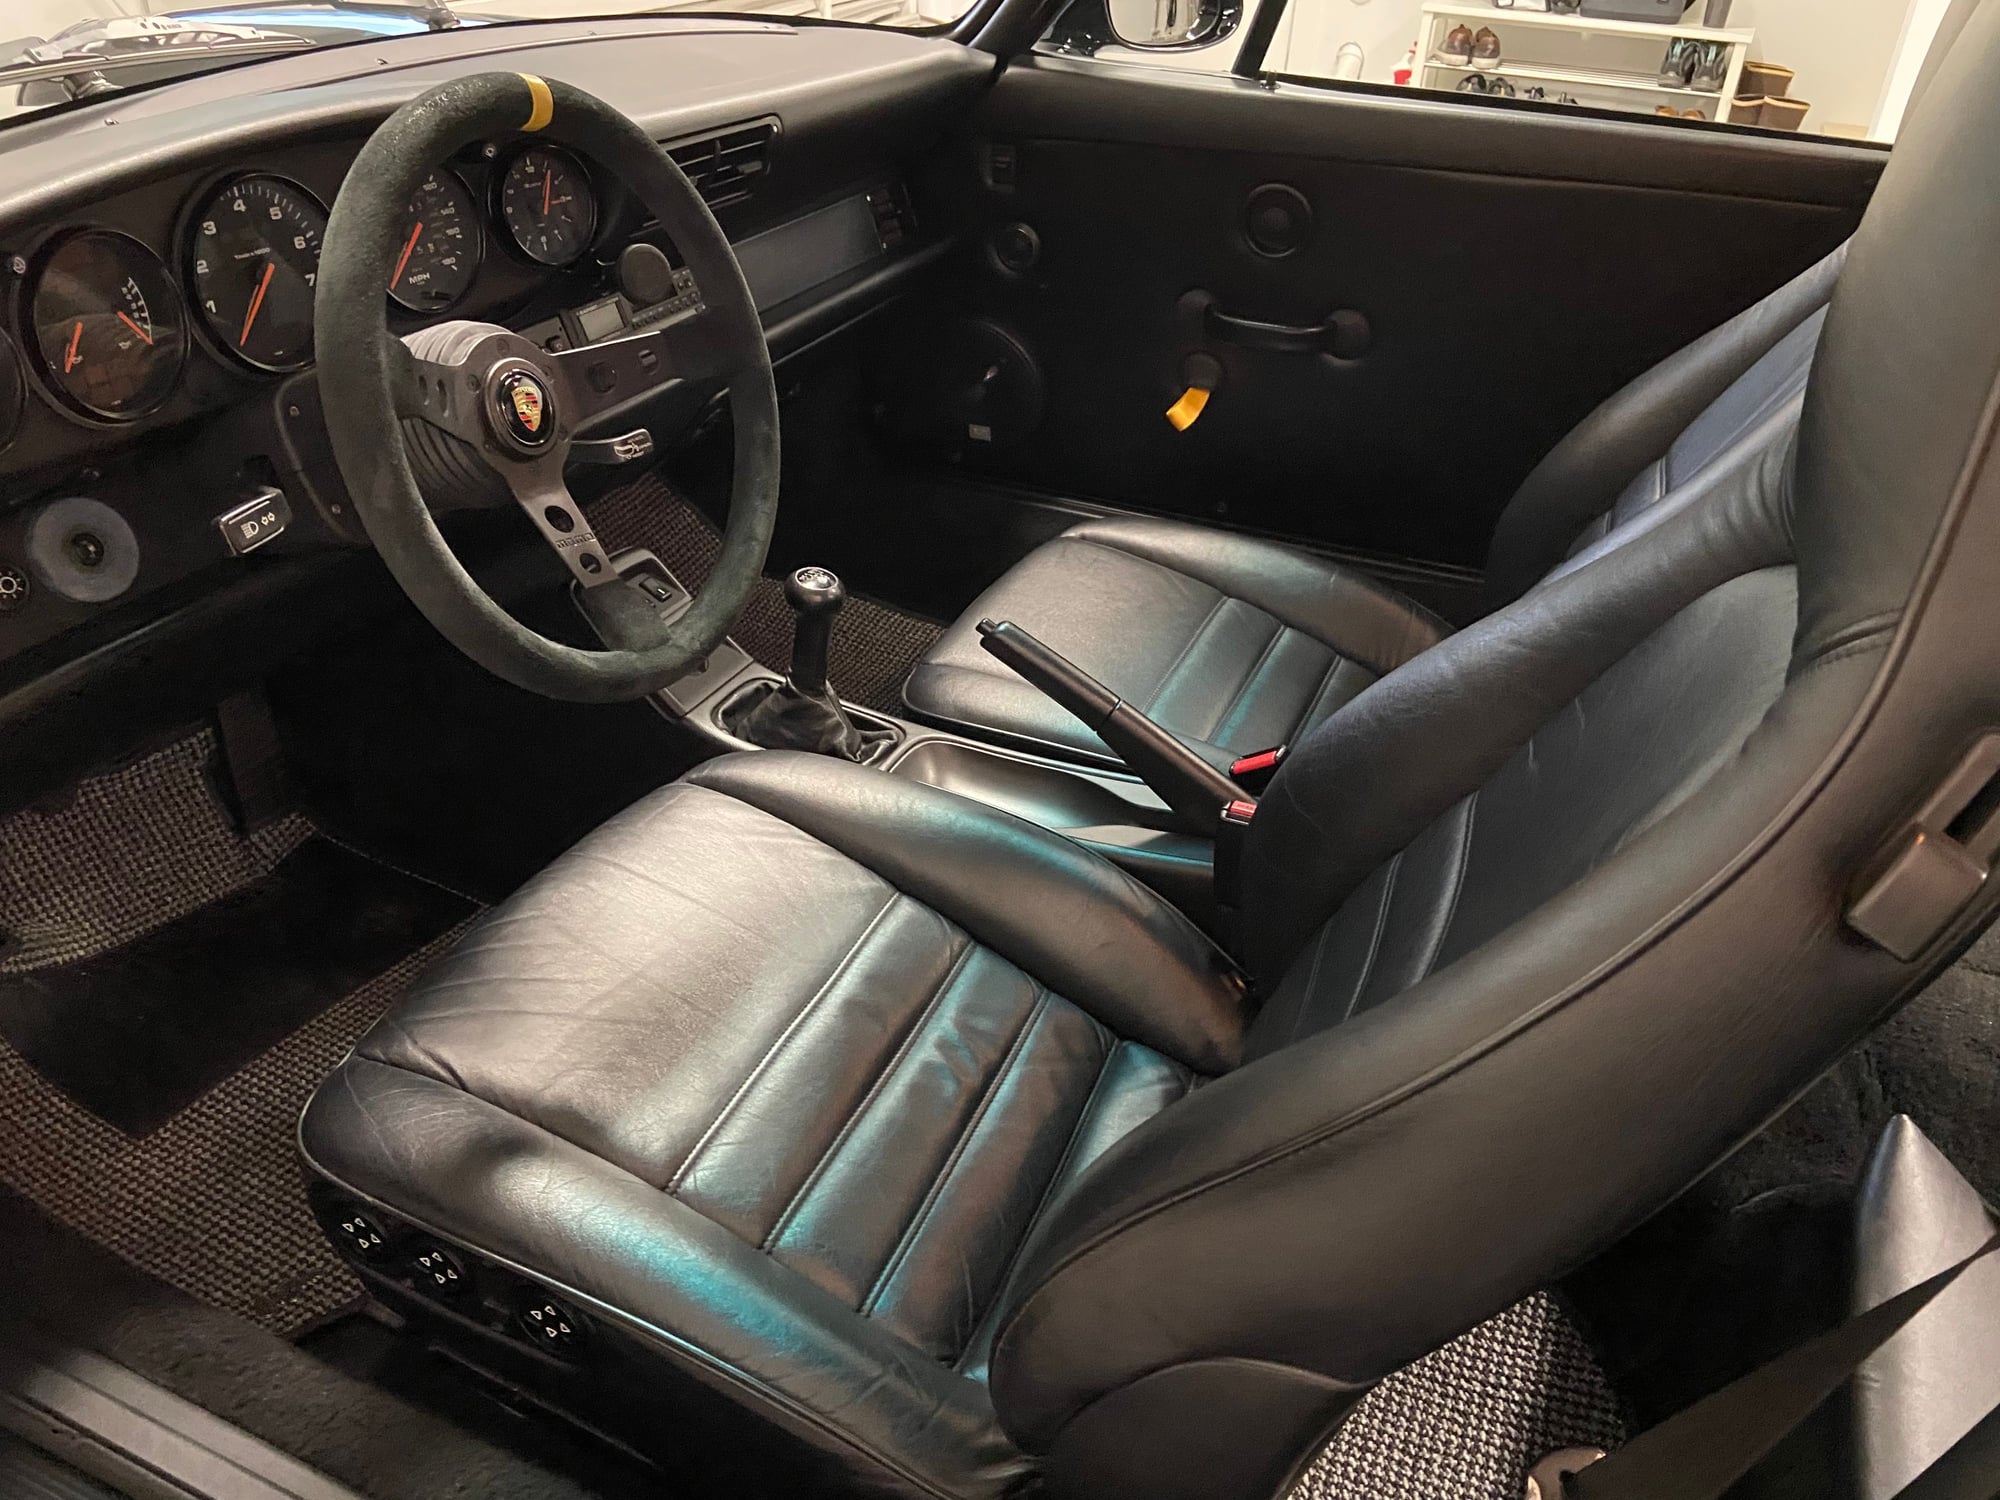 1991 Porsche 911 - 1991 C2 964 - Used - VIN WP012345678901234 - 80,000 Miles - 6 cyl - 2WD - Manual - Coupe - Black - Seatte, WA 98136, United States